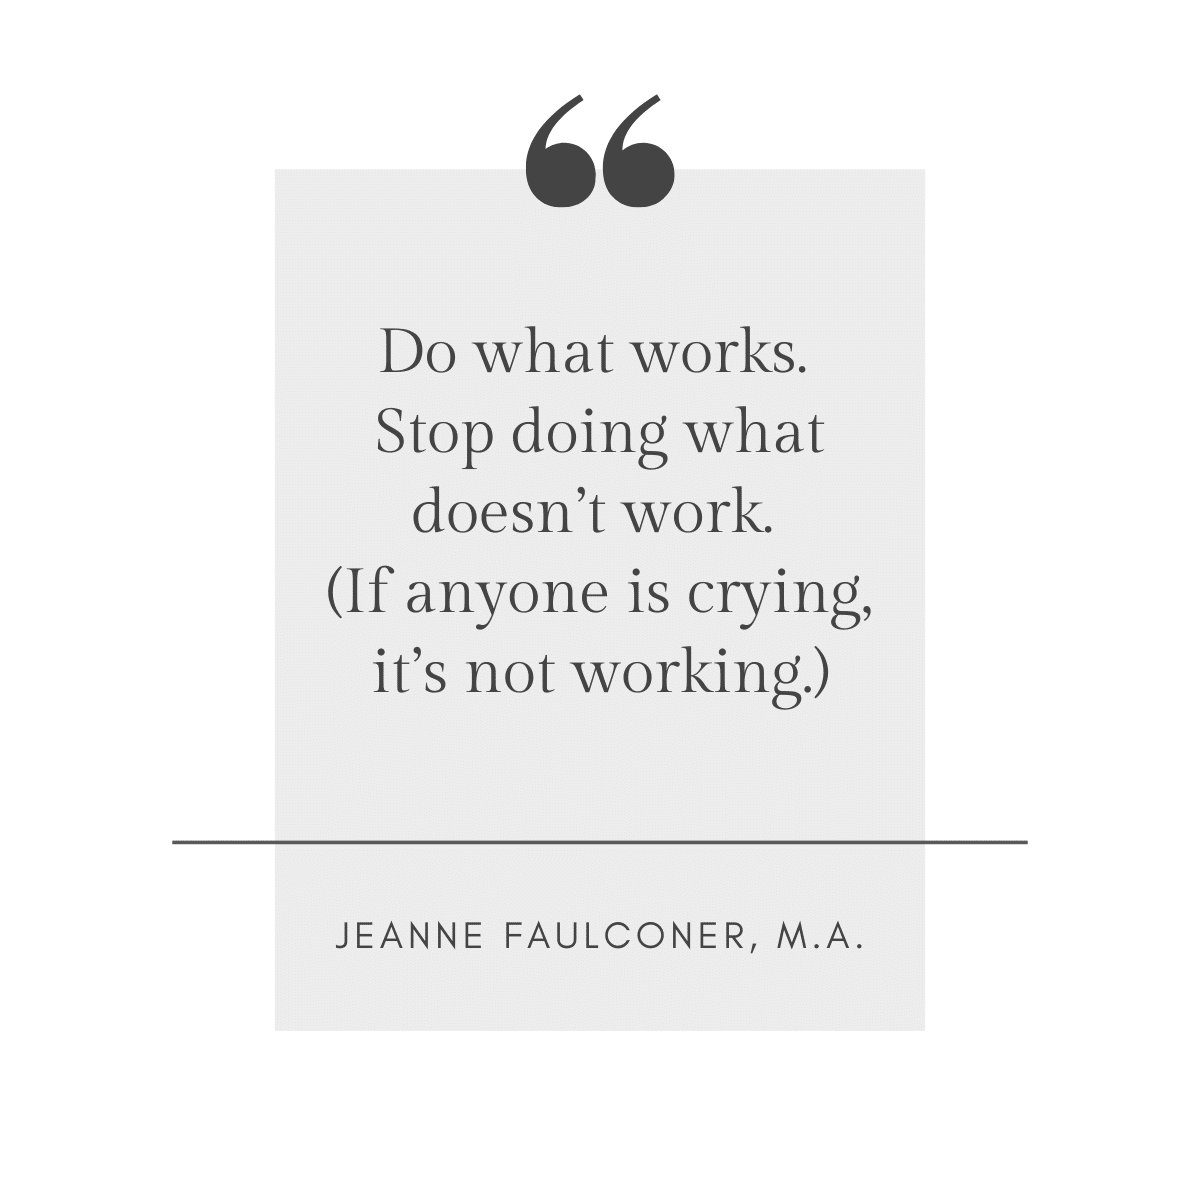 Do what works. Stop doing what doesn't work. (If anyone is crying, it's not working.) ~ Jeanne Faulconer, M.A.